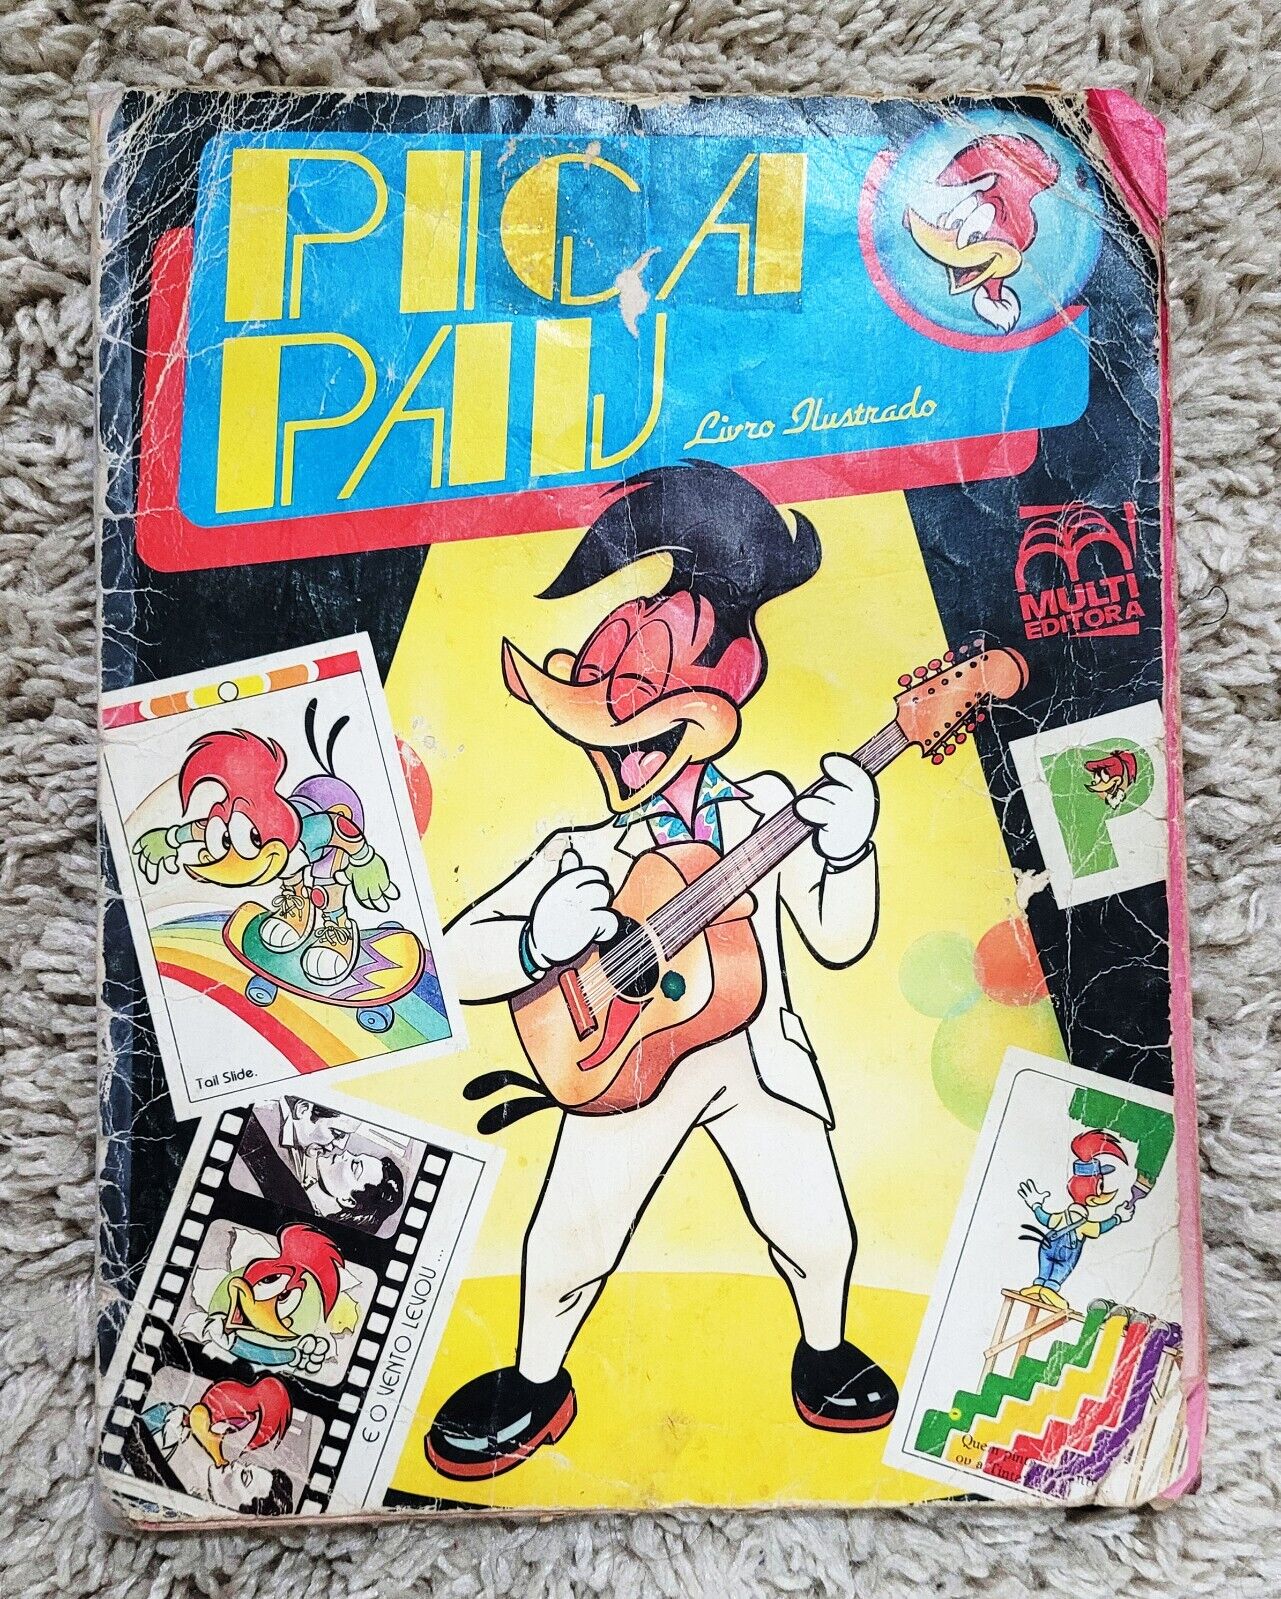 RARE: WOODY WOODPECKER (PICA-PAU BRAZIL) INCOMPLETE ALBUM WITH 140 CARDS 1989🔥